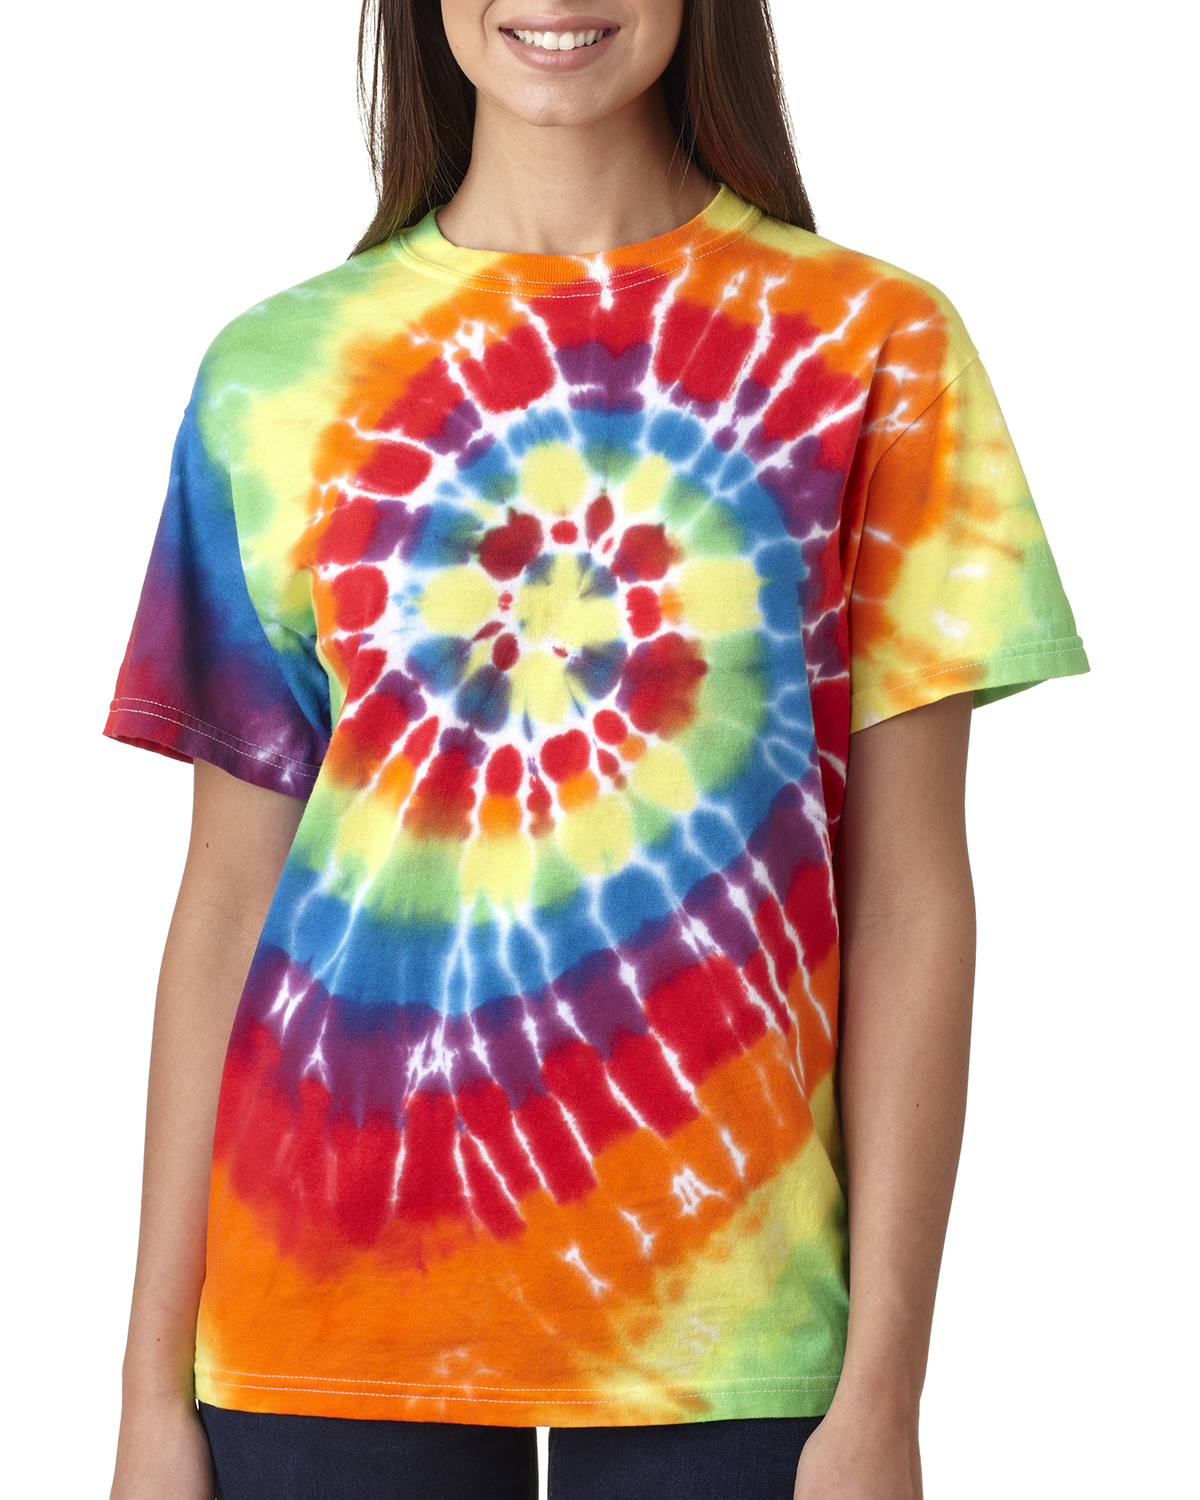 Youth Multi-Color Spiral T-Shirt M/Michelangelo 